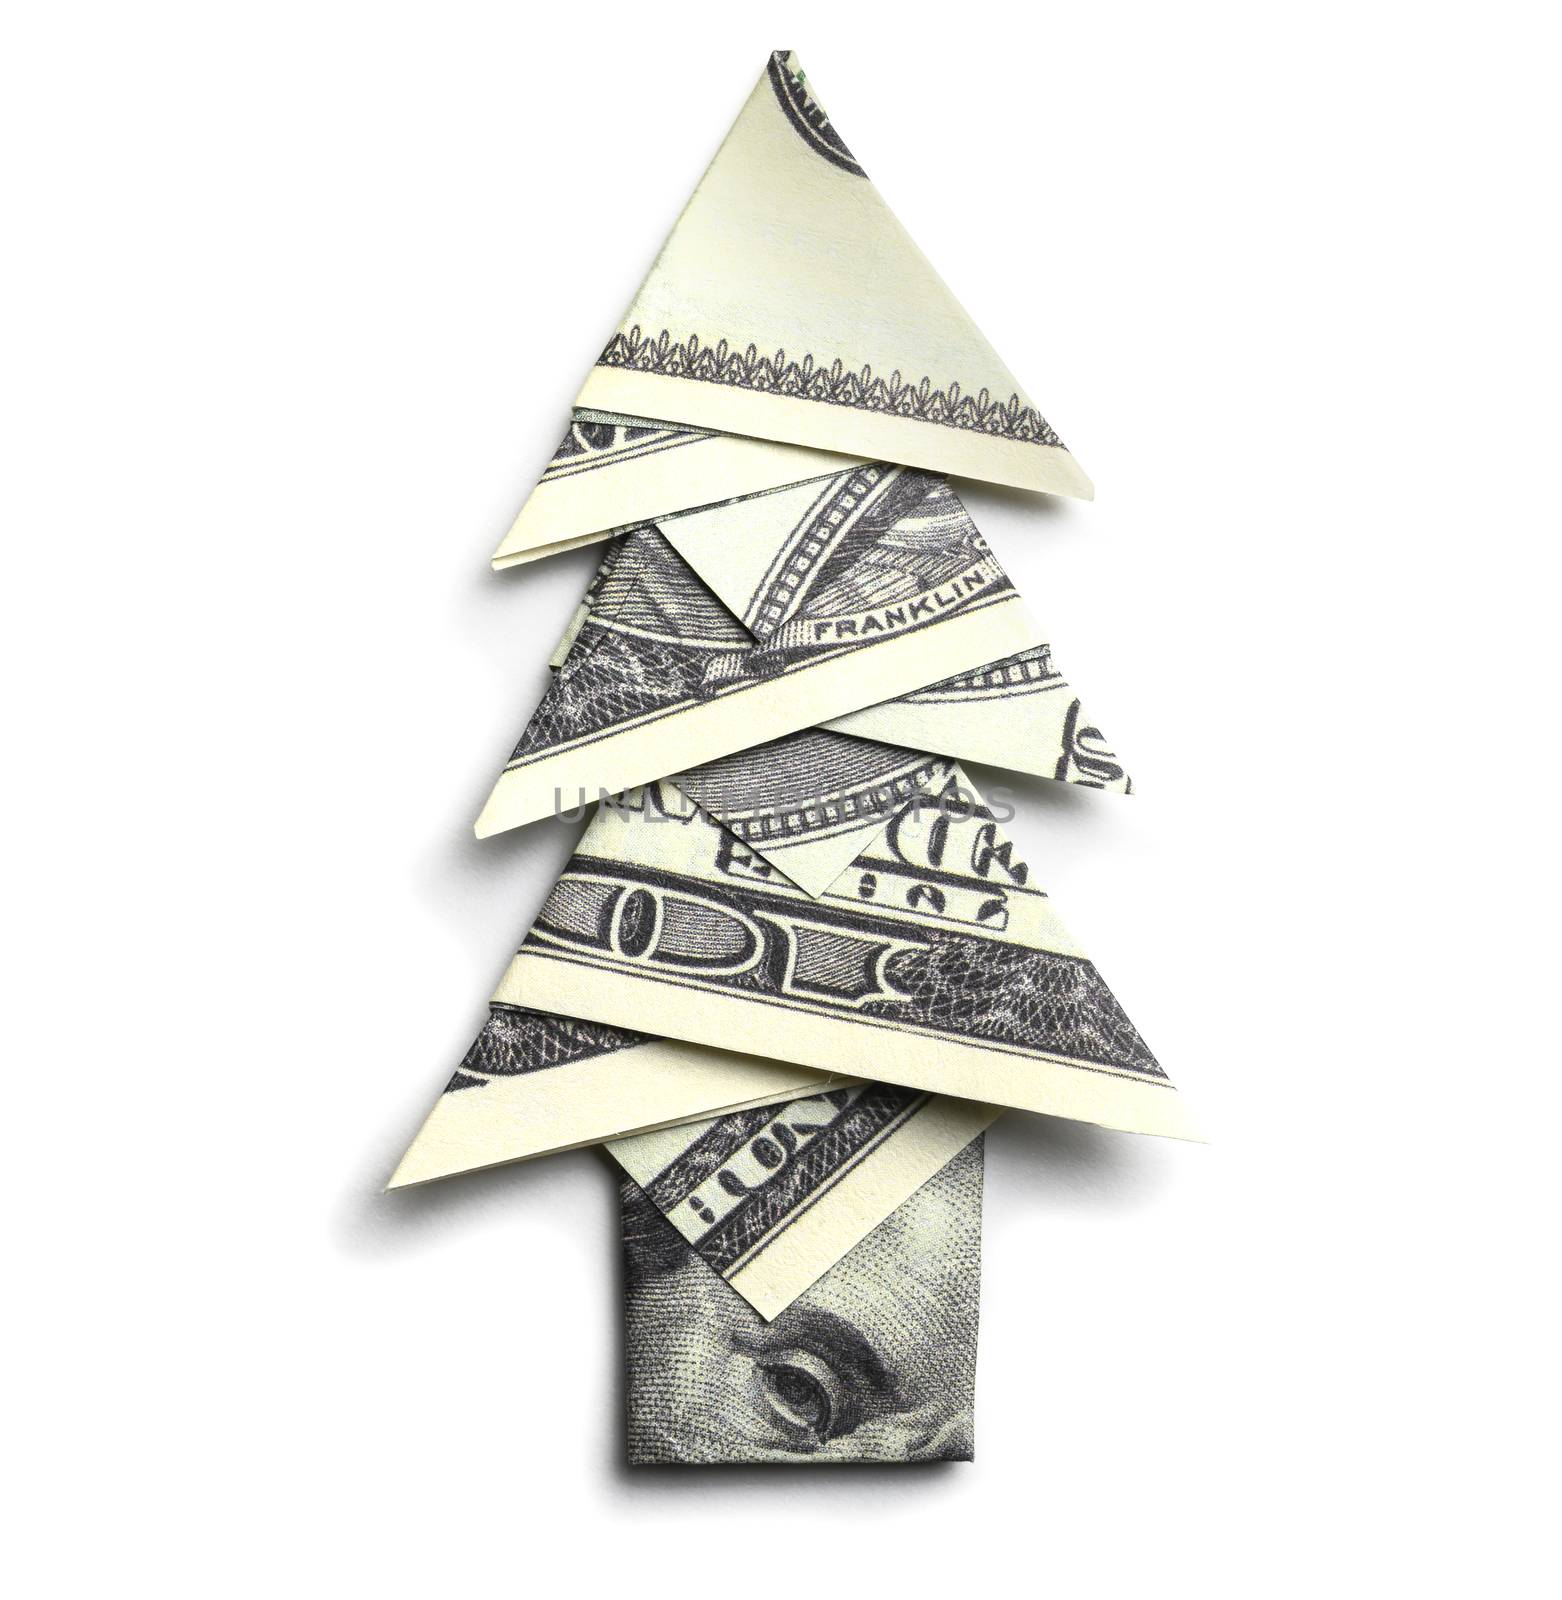 100 us dollars in the shape of a Christmas tree on a white background.